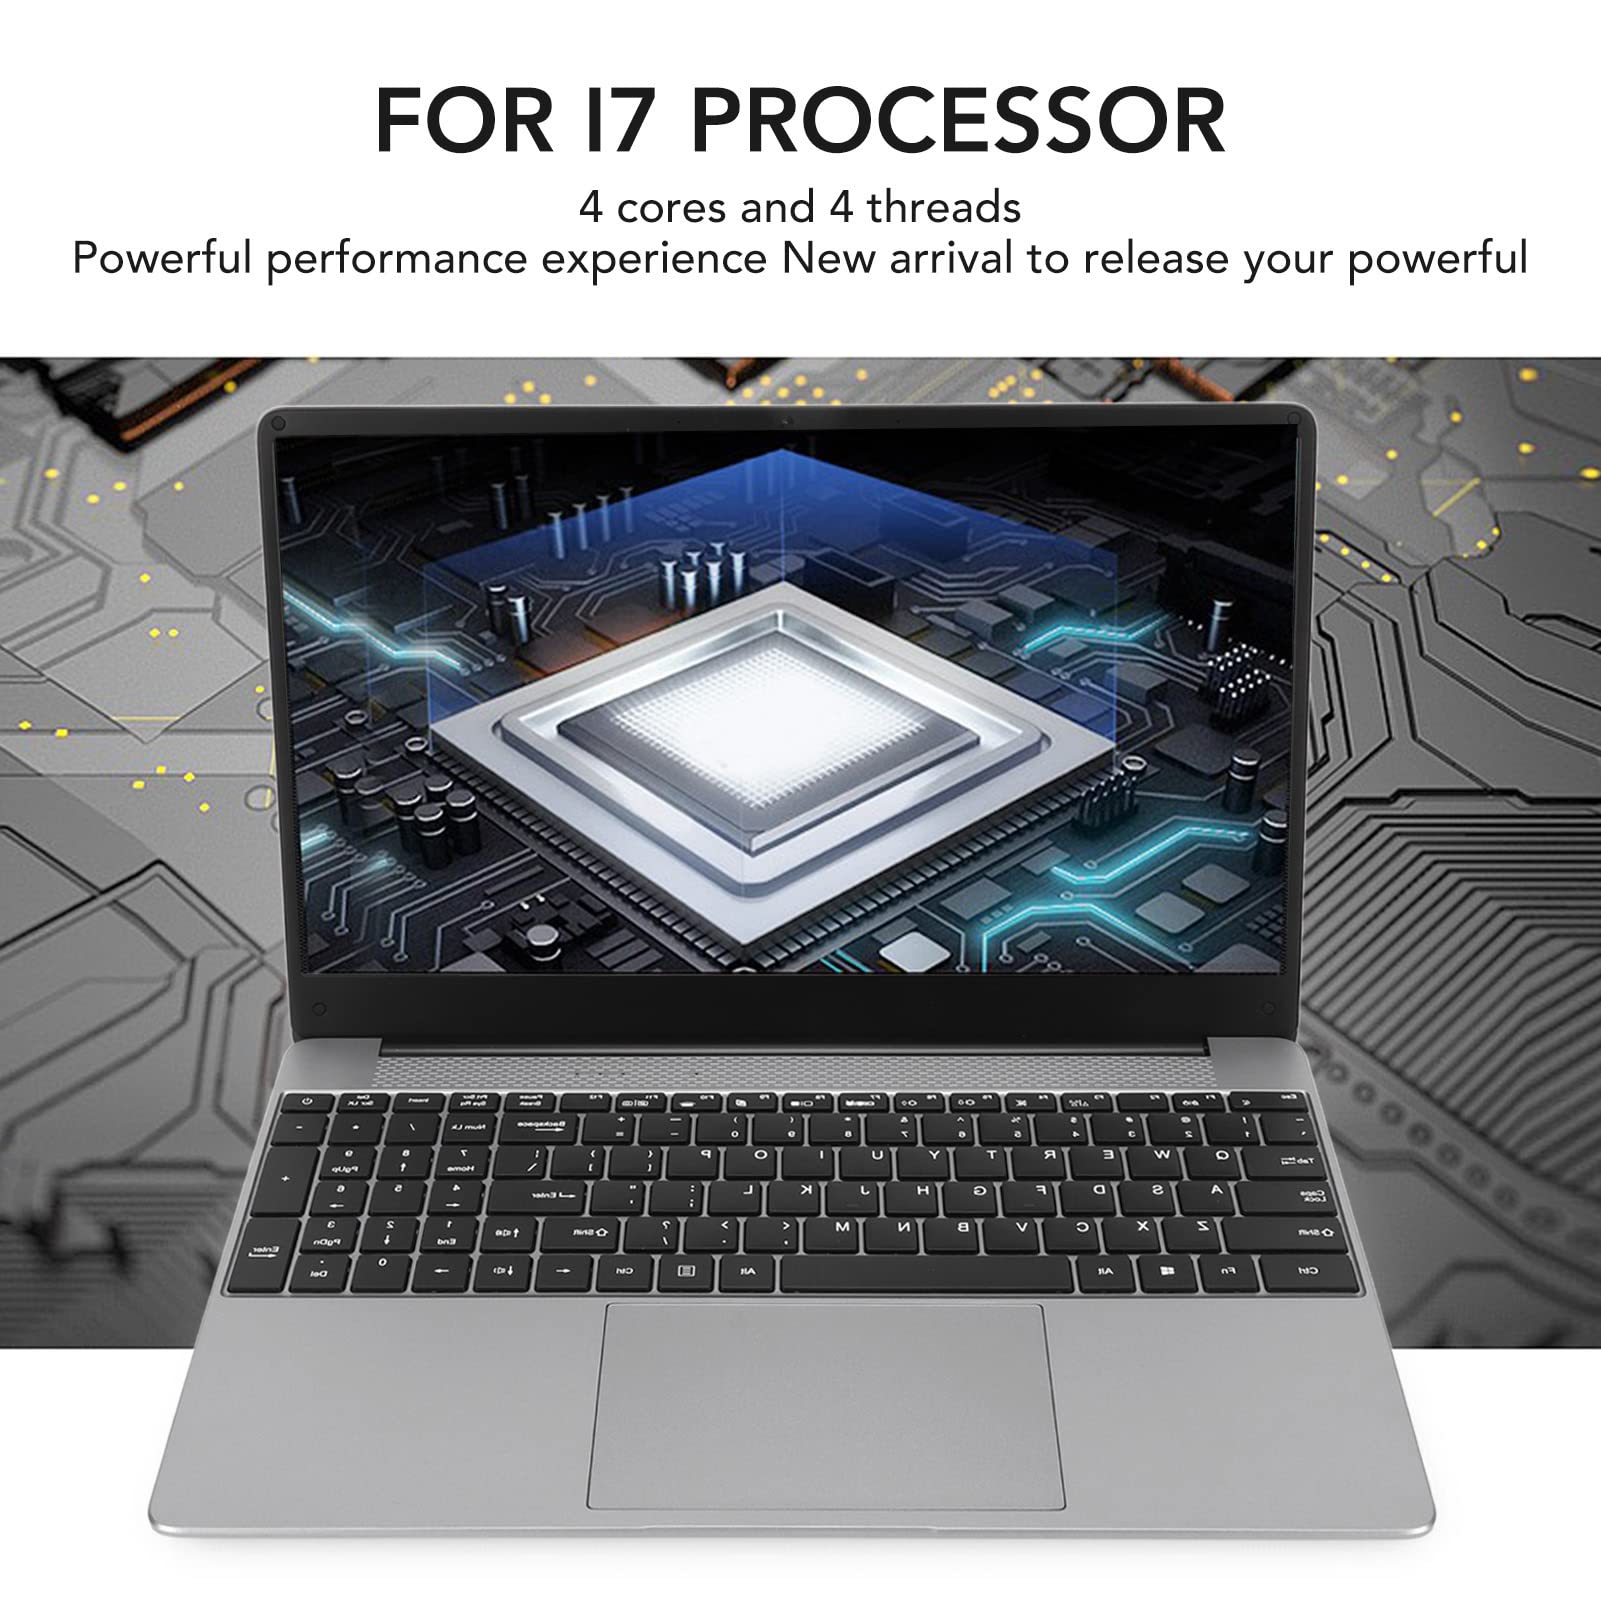 Pomya 2 in 1 Laptop Computer Windows10, 15.6inch Notebook 16G RAM 512G ROM with Backlit Keyboard, 5000mAh Laptop Computer for Intel I7 CPU, for Business, Study and Entertainment